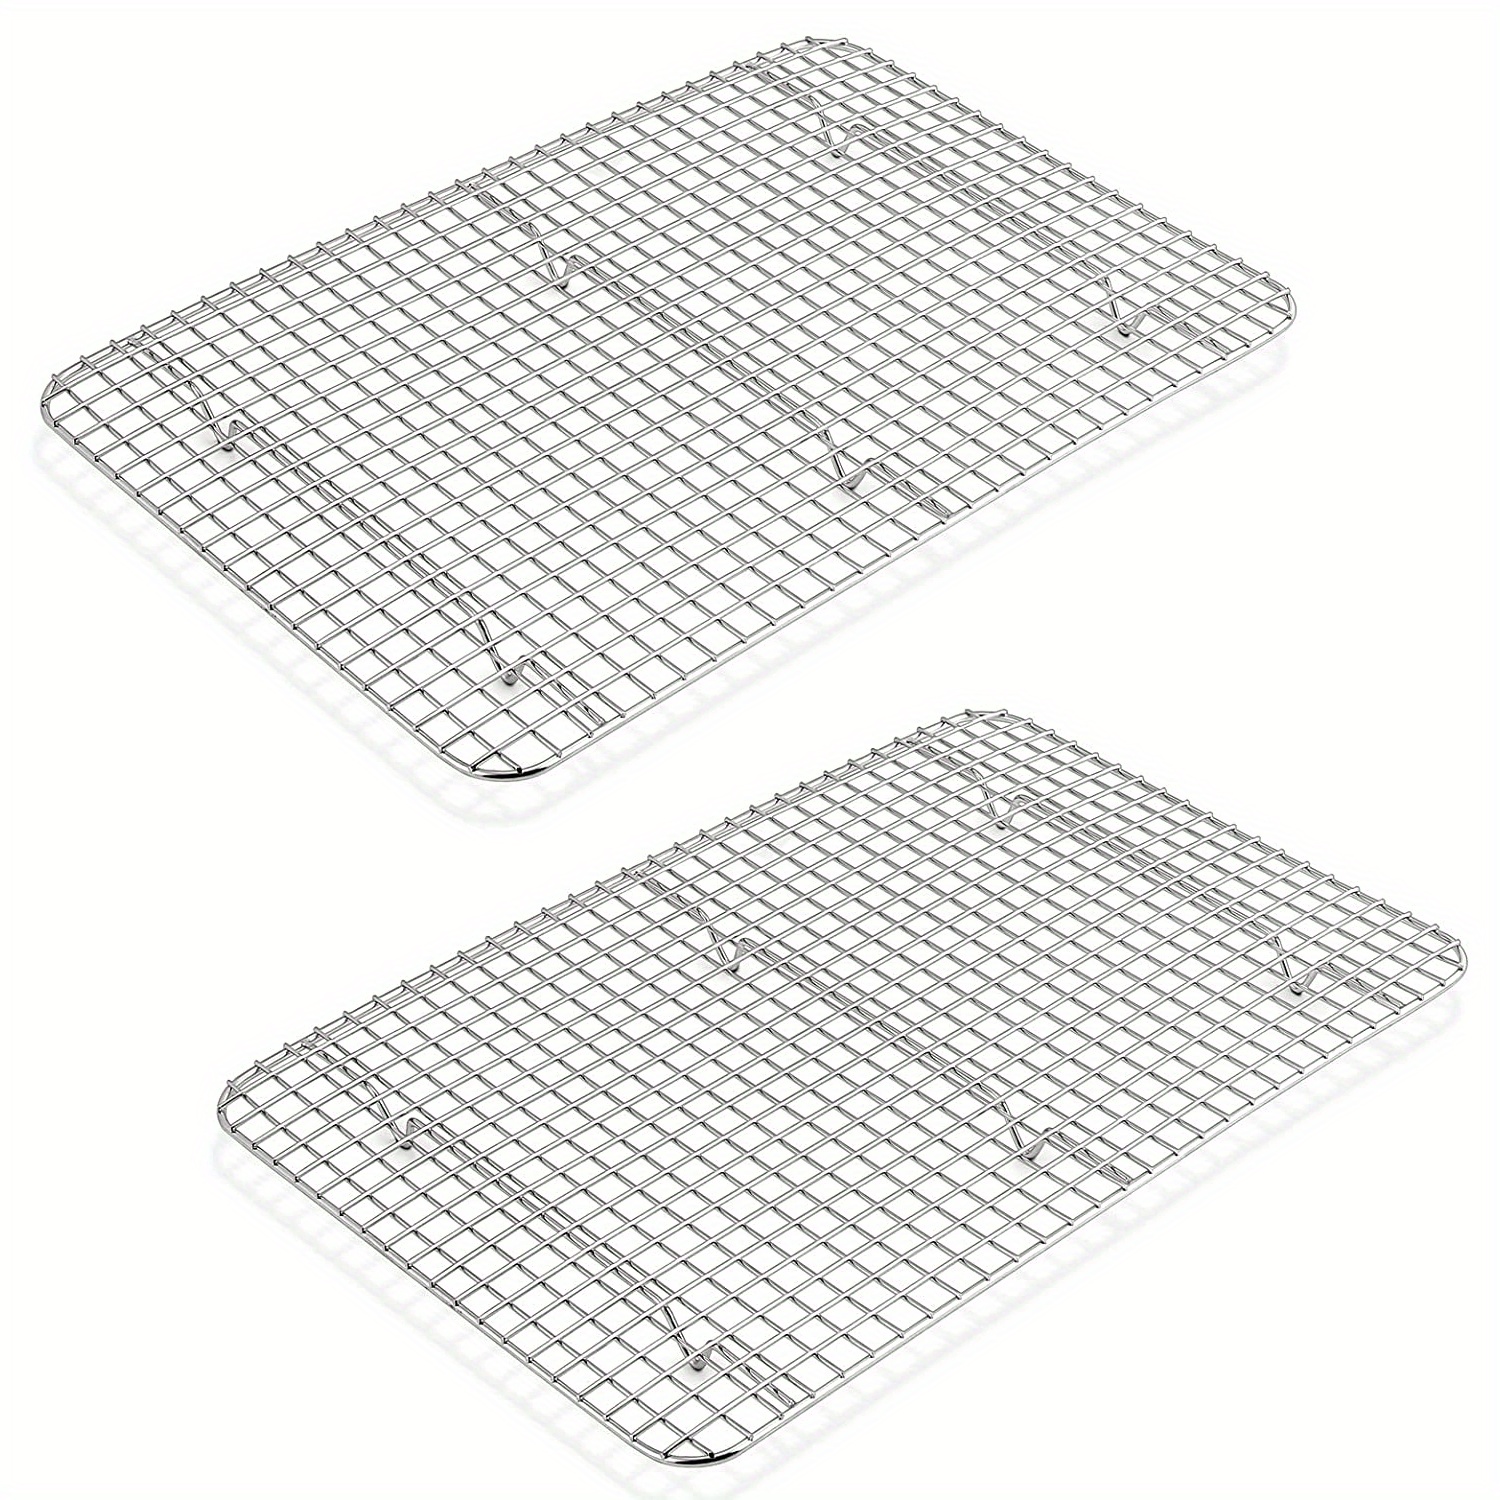 Stainless Steel Baking & Cooling Wire Rack-8-1/2 x 12 Fits